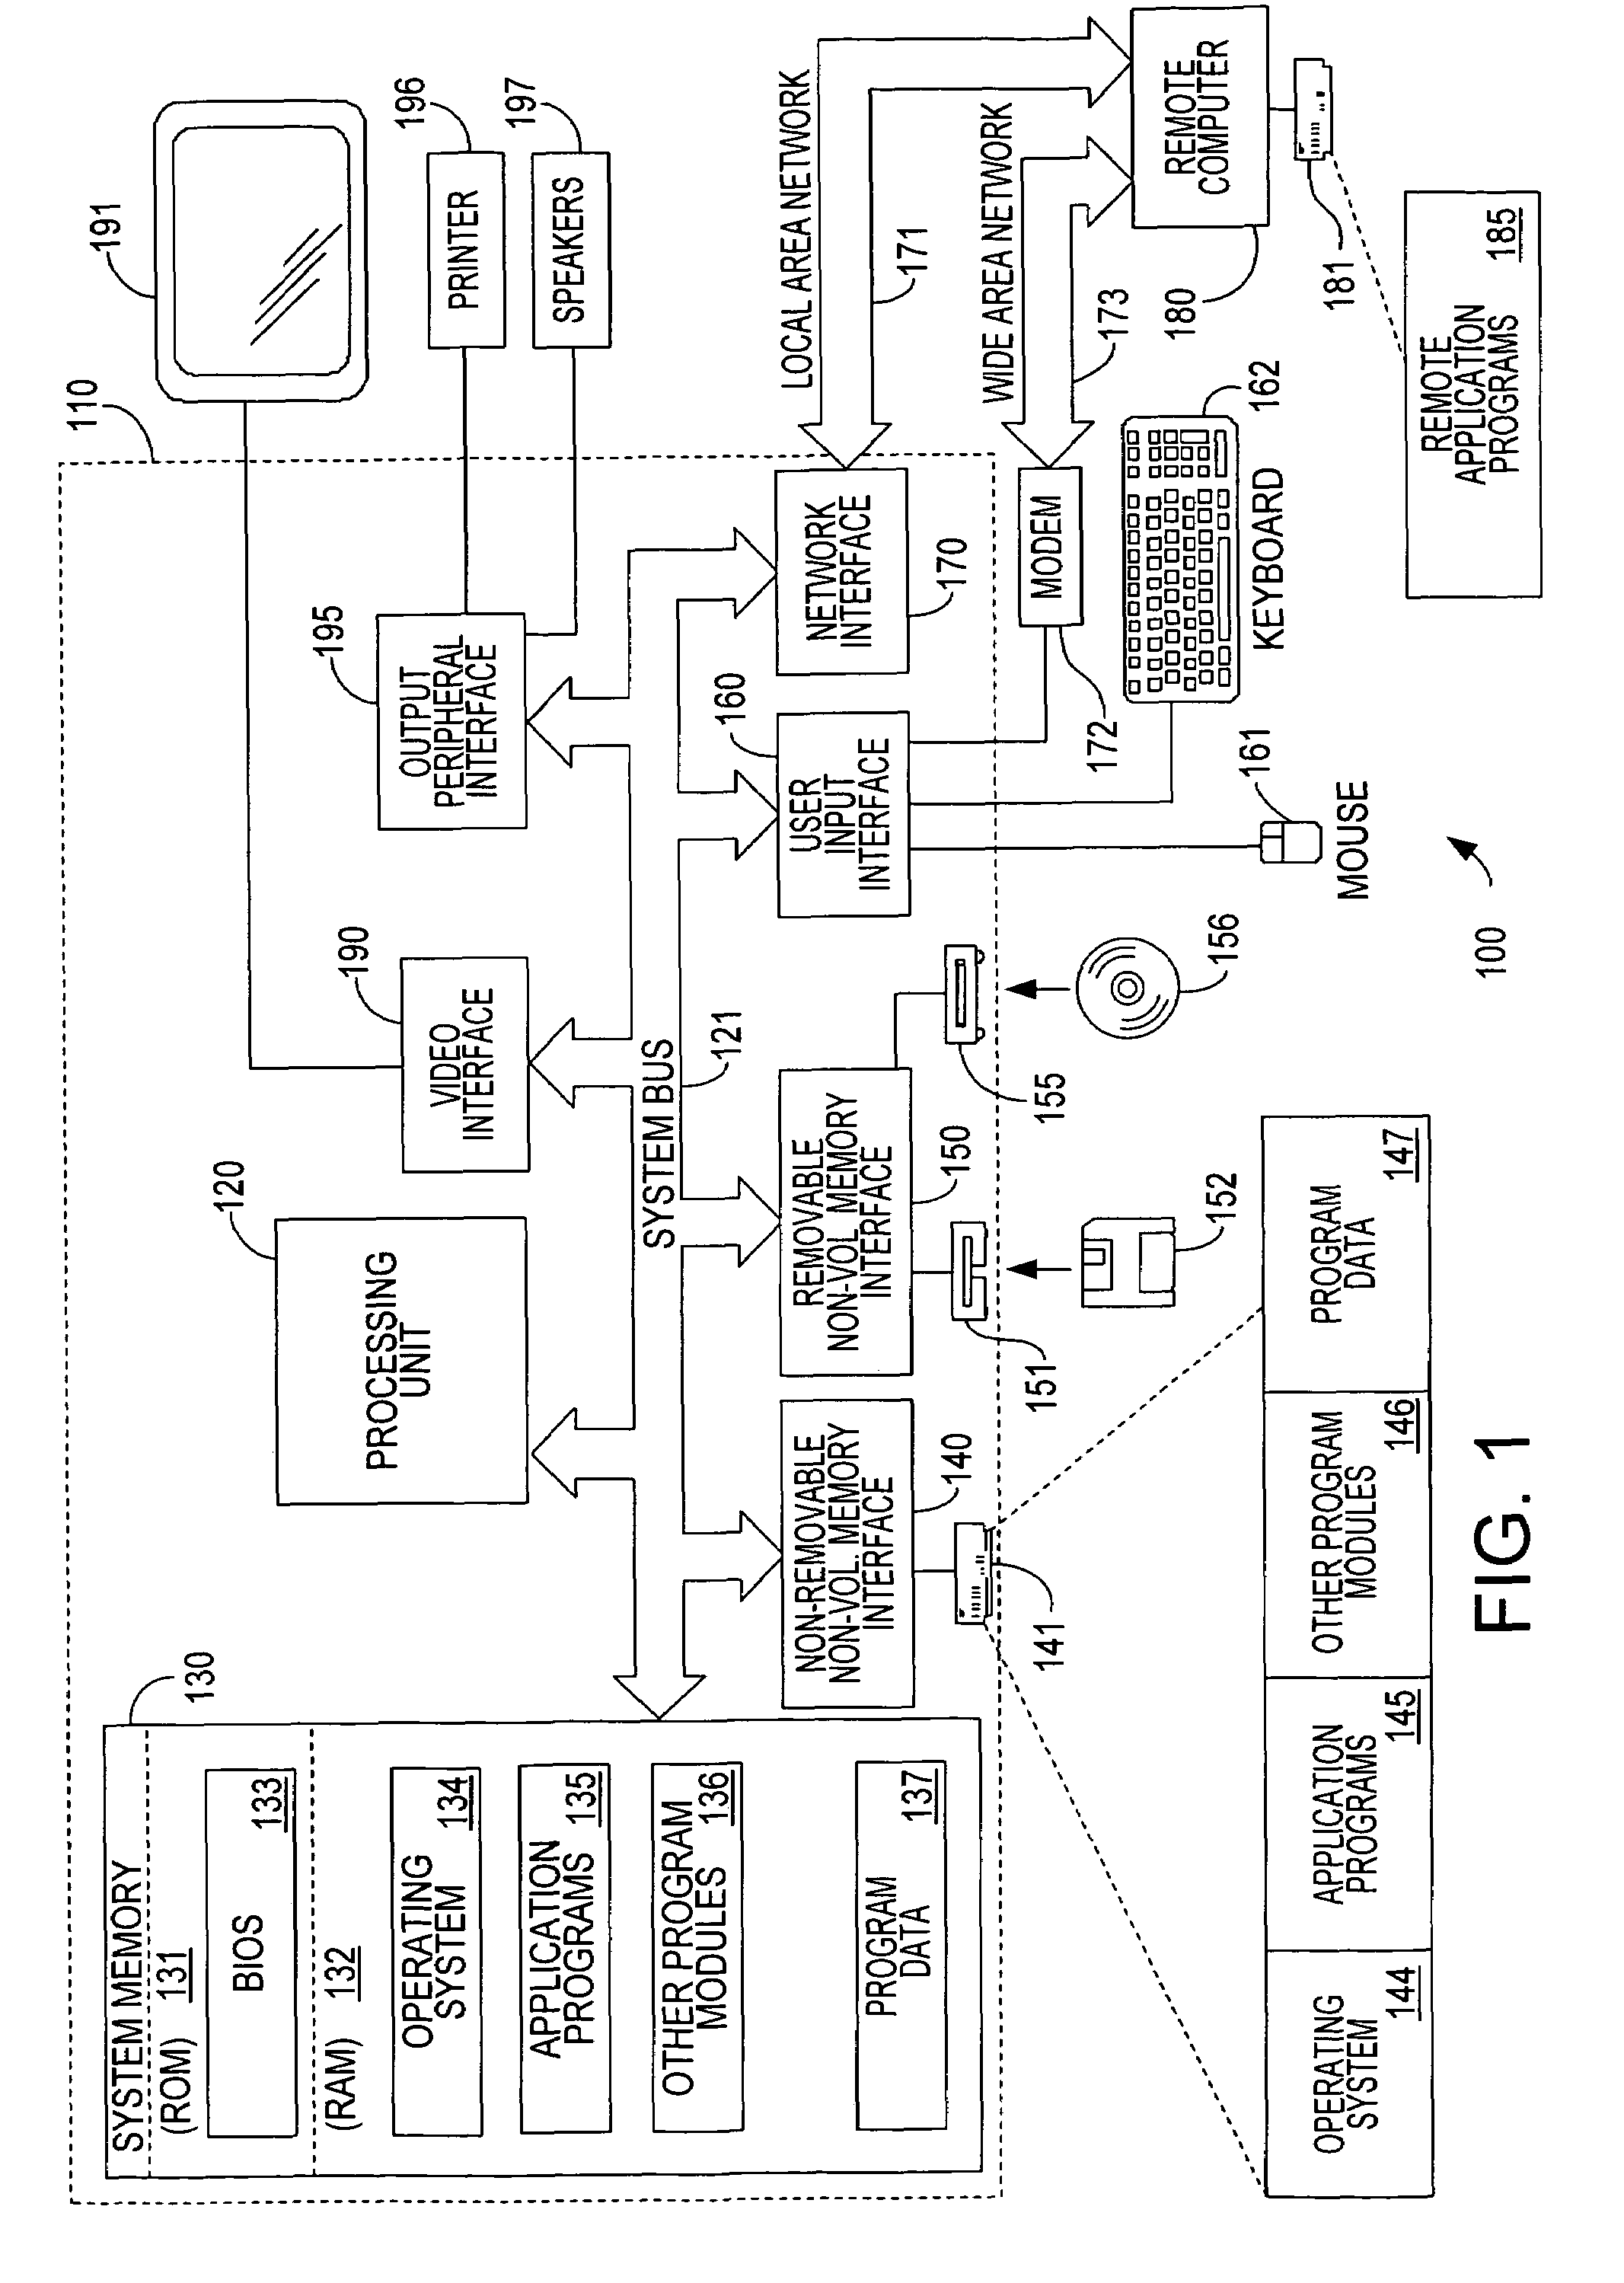 Simplified creation and termination of an ad hoc wireless network with internet connection sharing